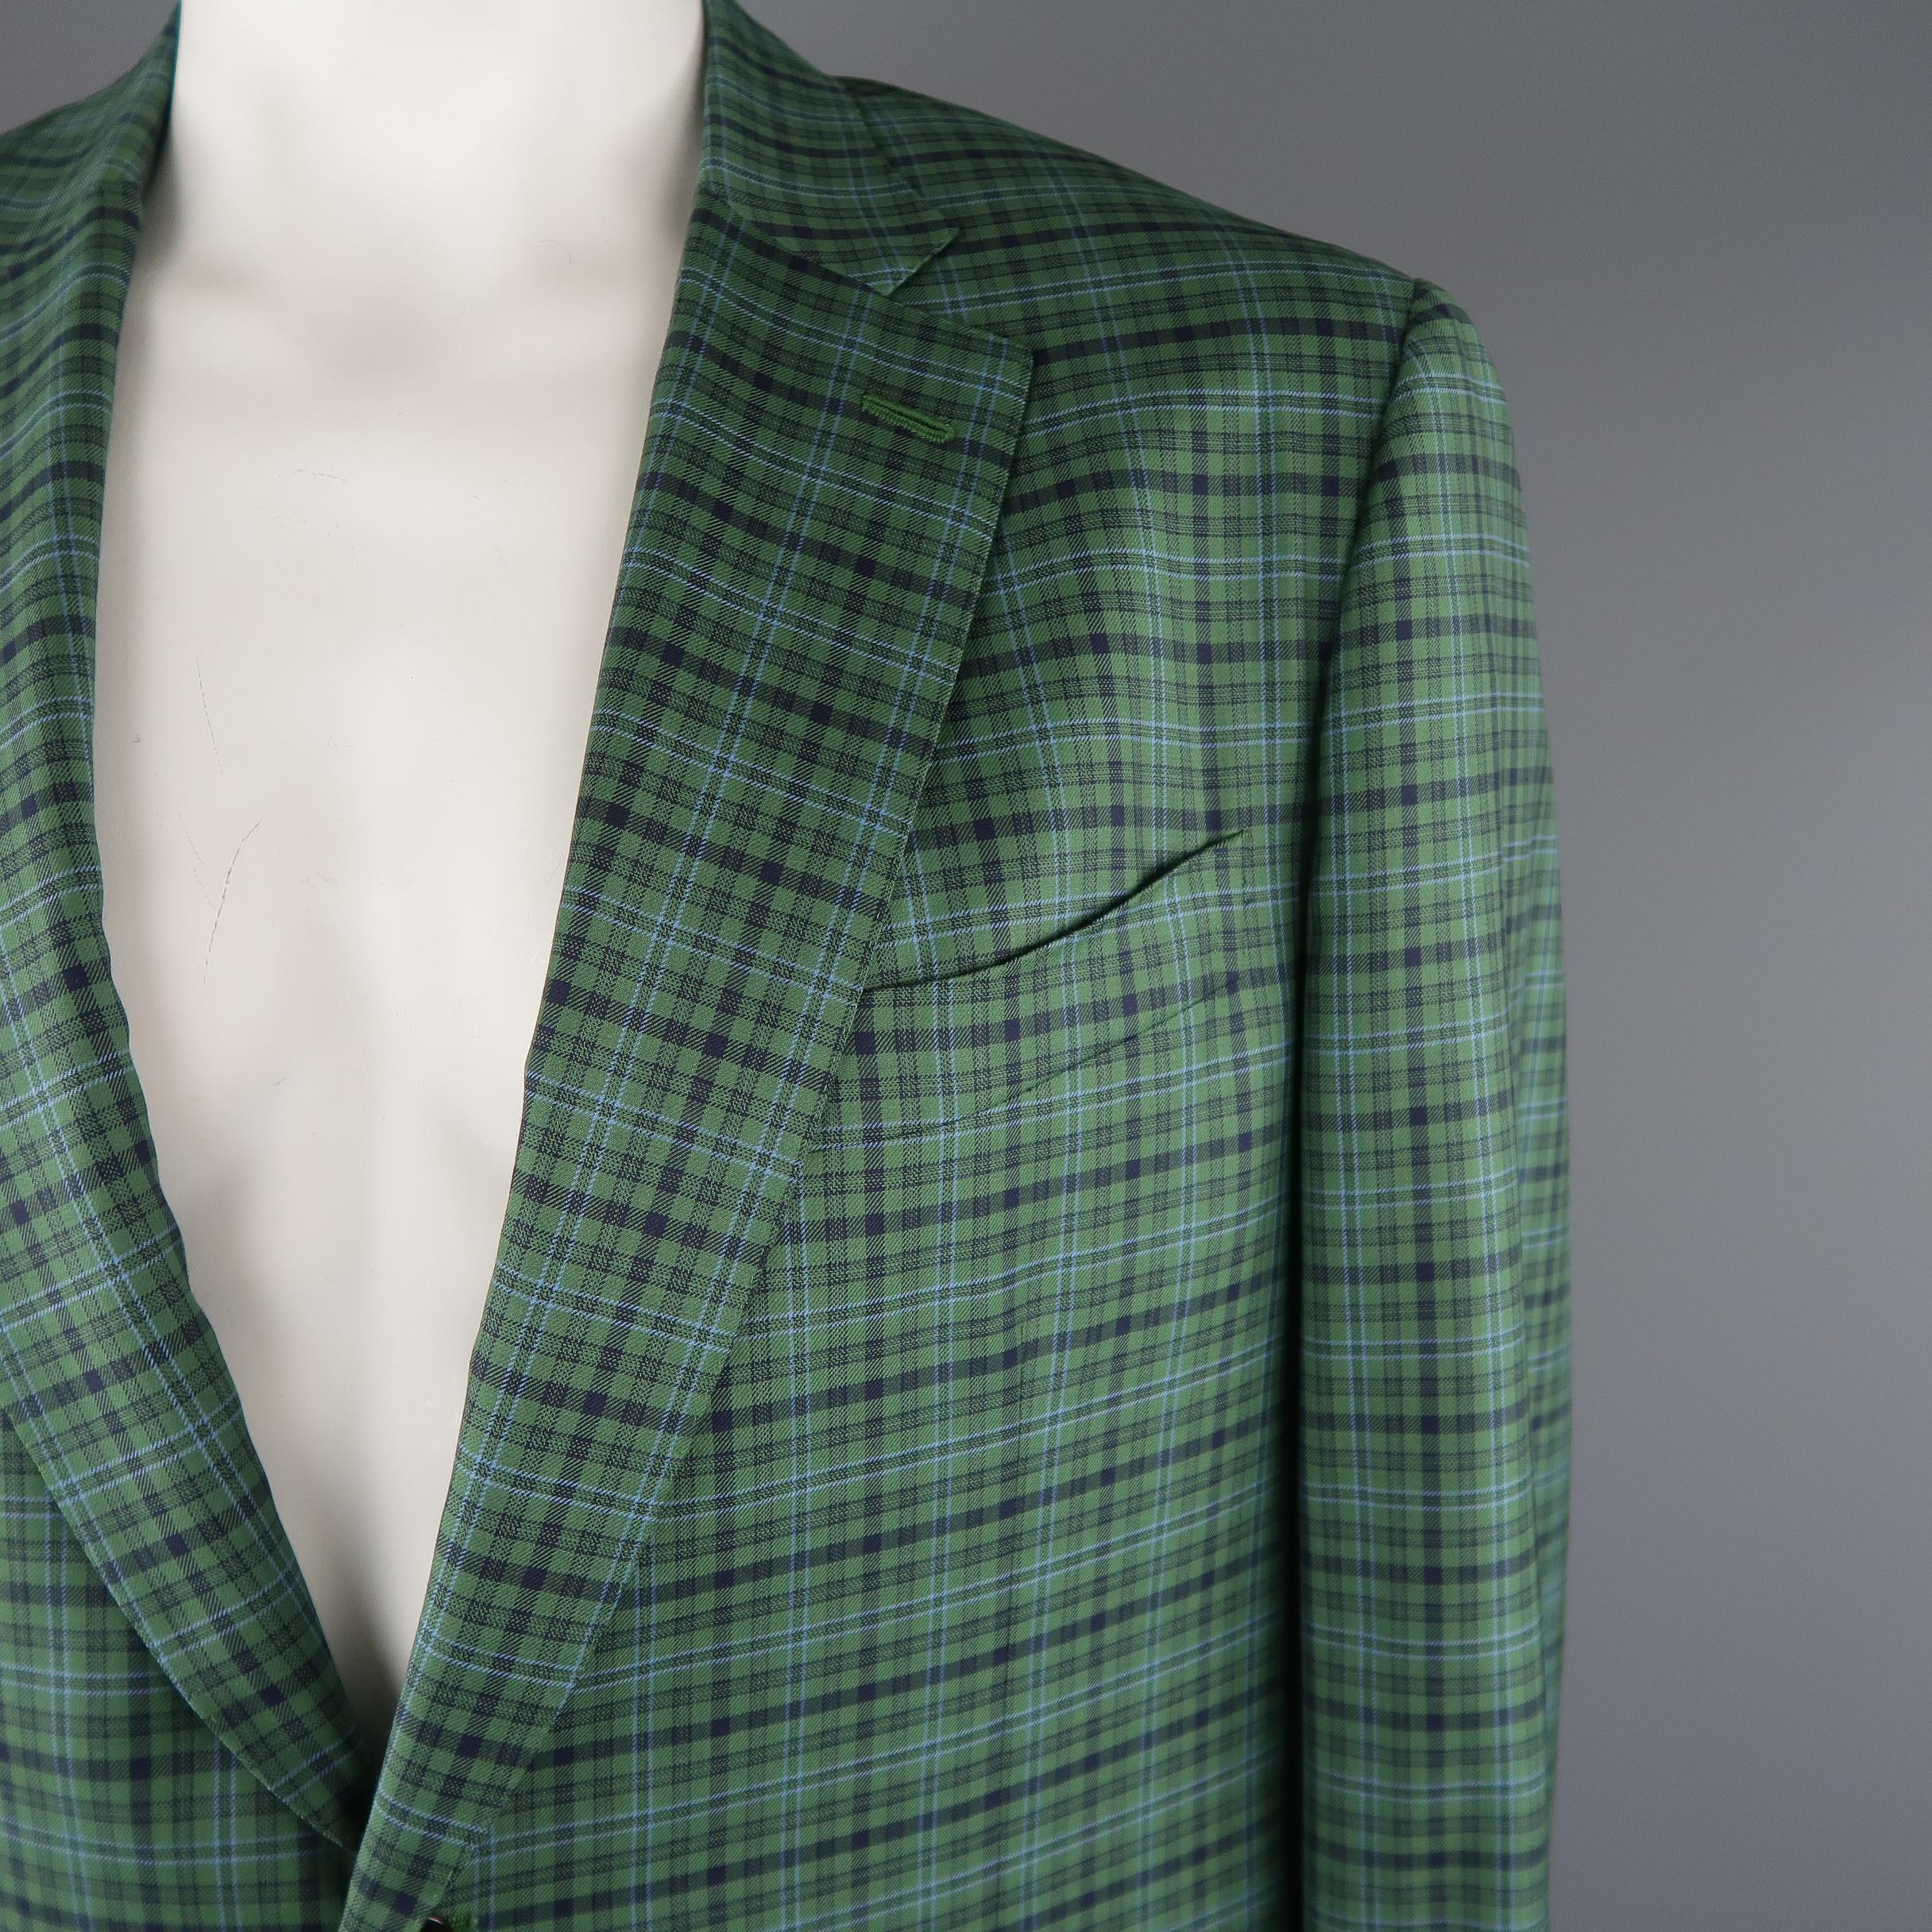 ISAIA long sport coat come in green tones in plaid wool material, featuring notch lapel, 2 buttons on the closure, single breasted, flap pockets, double vent on the hem and functional buttons on the cuff. Made in Italy.
 
Excellent Pre-Owned